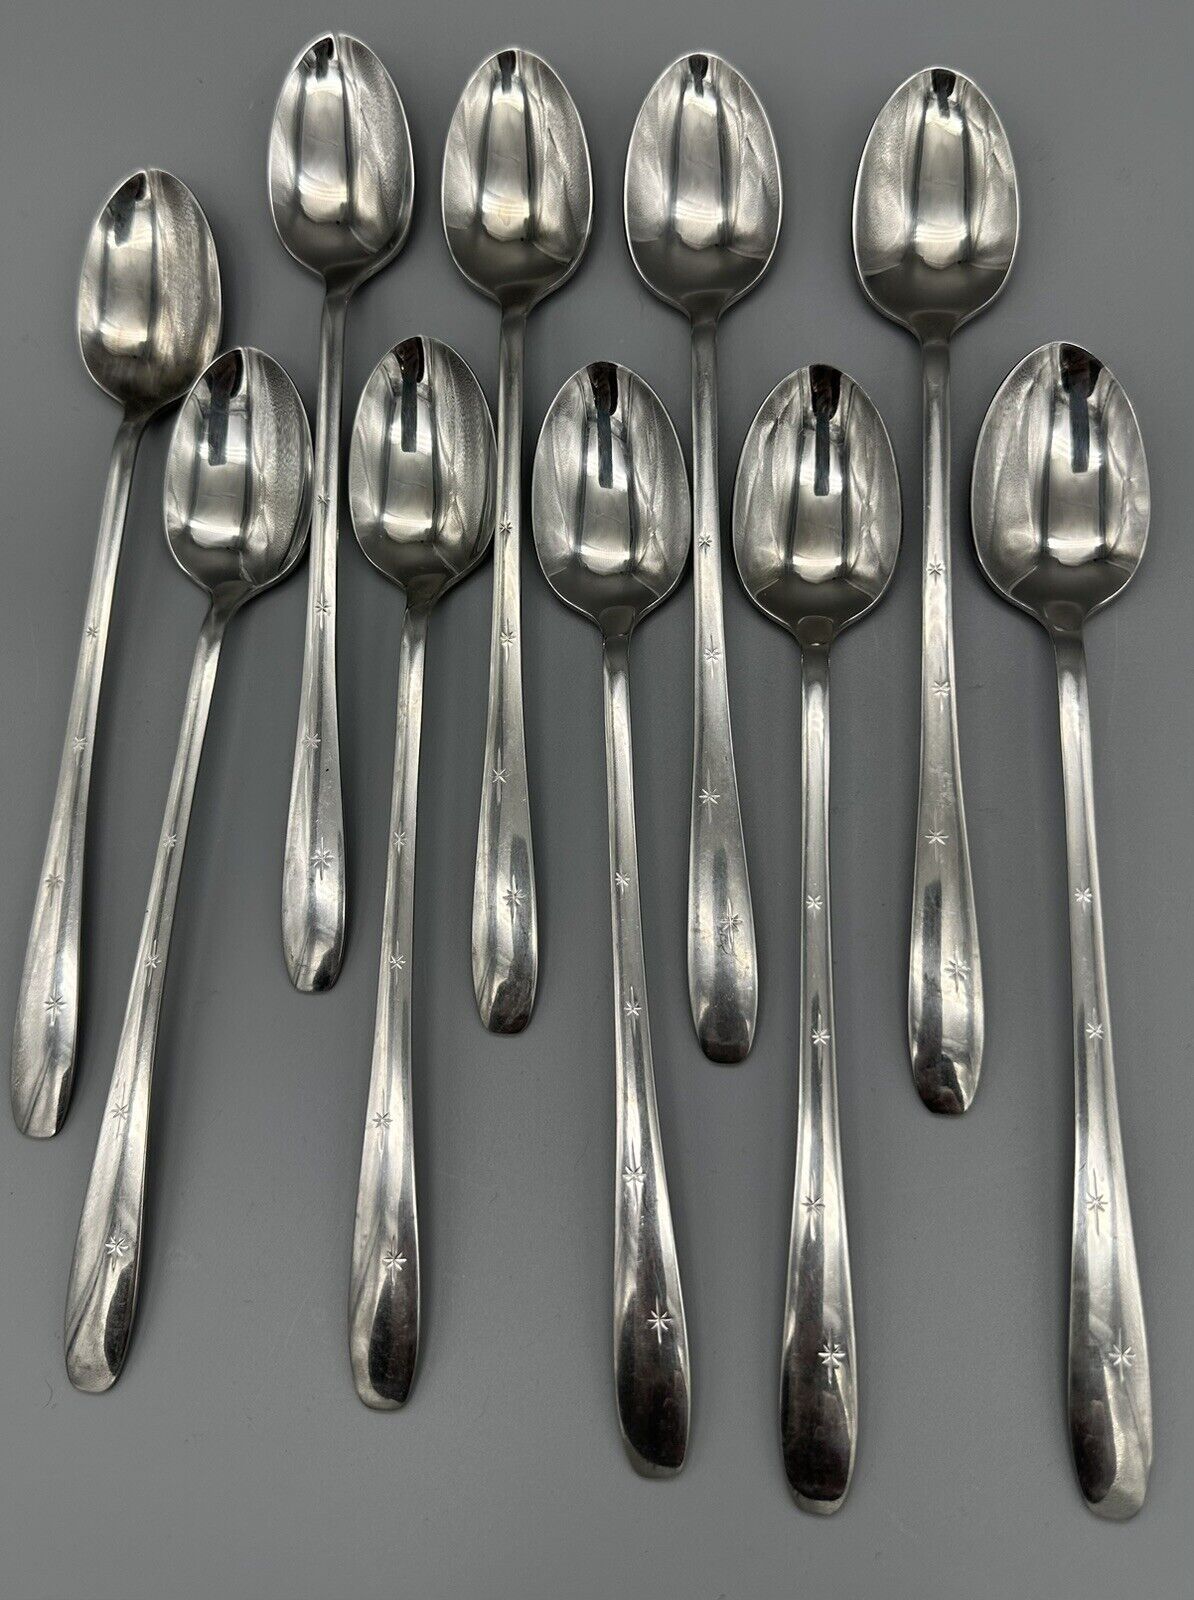 Wallace BRIGHT STAR Atomic MCM Stainless Iced Tea Spoon set of 10